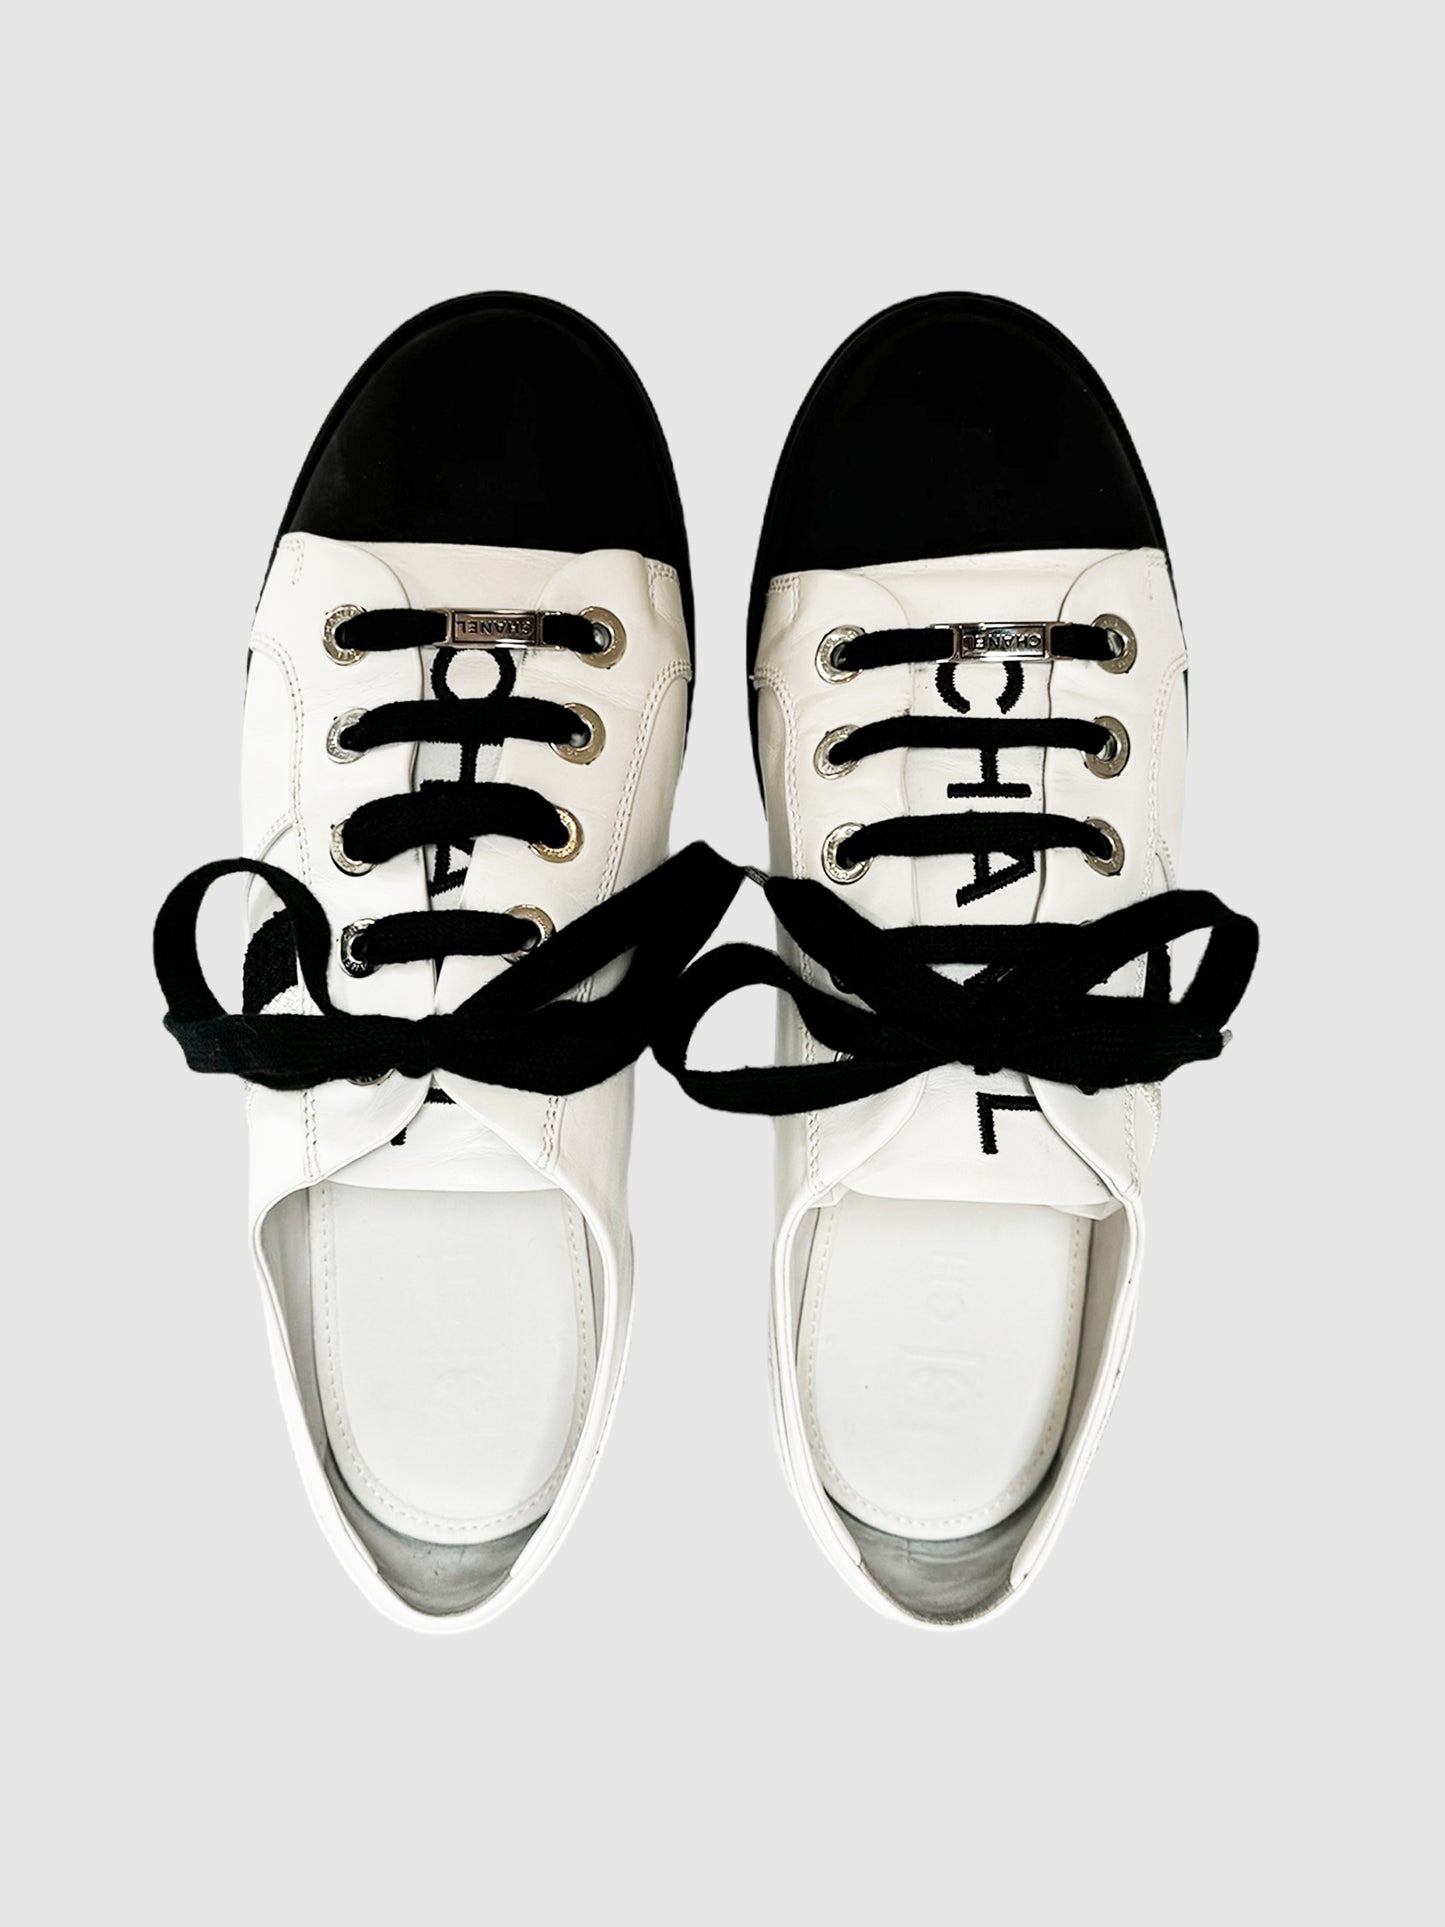 Chanel Leather Sneakers - Size 39.5